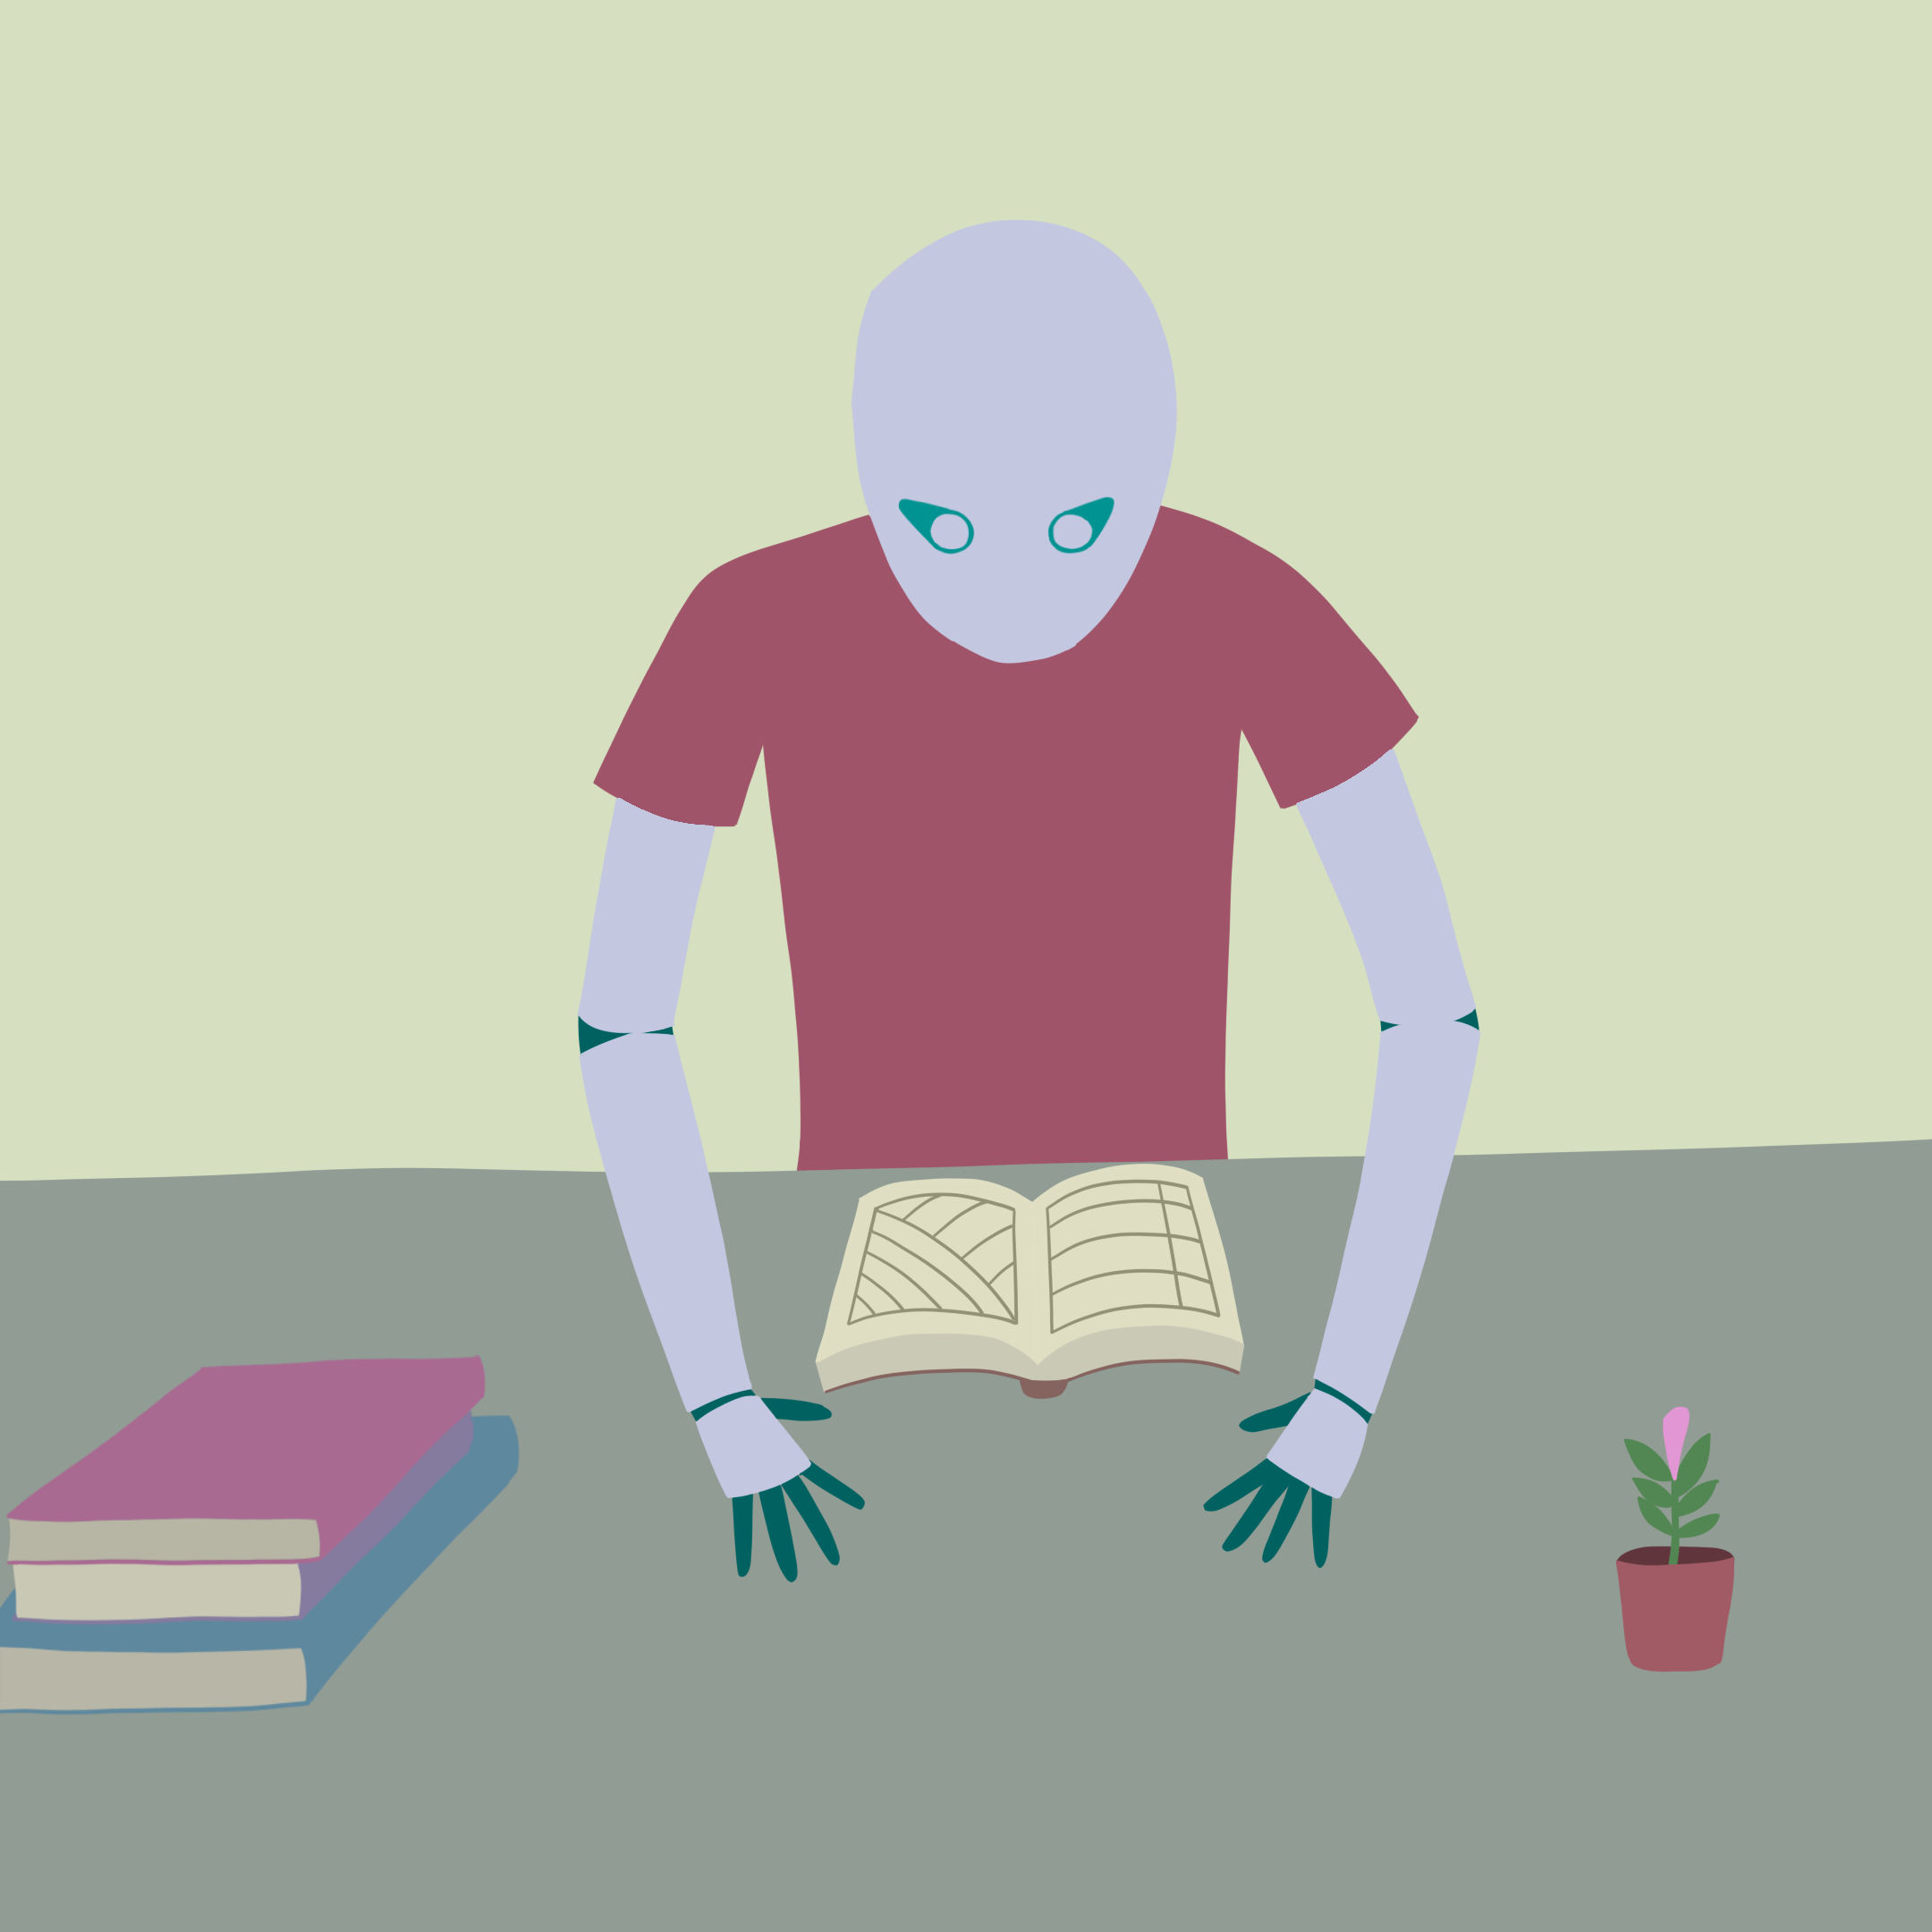 A robot named Rova sitting at a table while studying from a book. On the table there are some books and the potted plant Evi gave them.